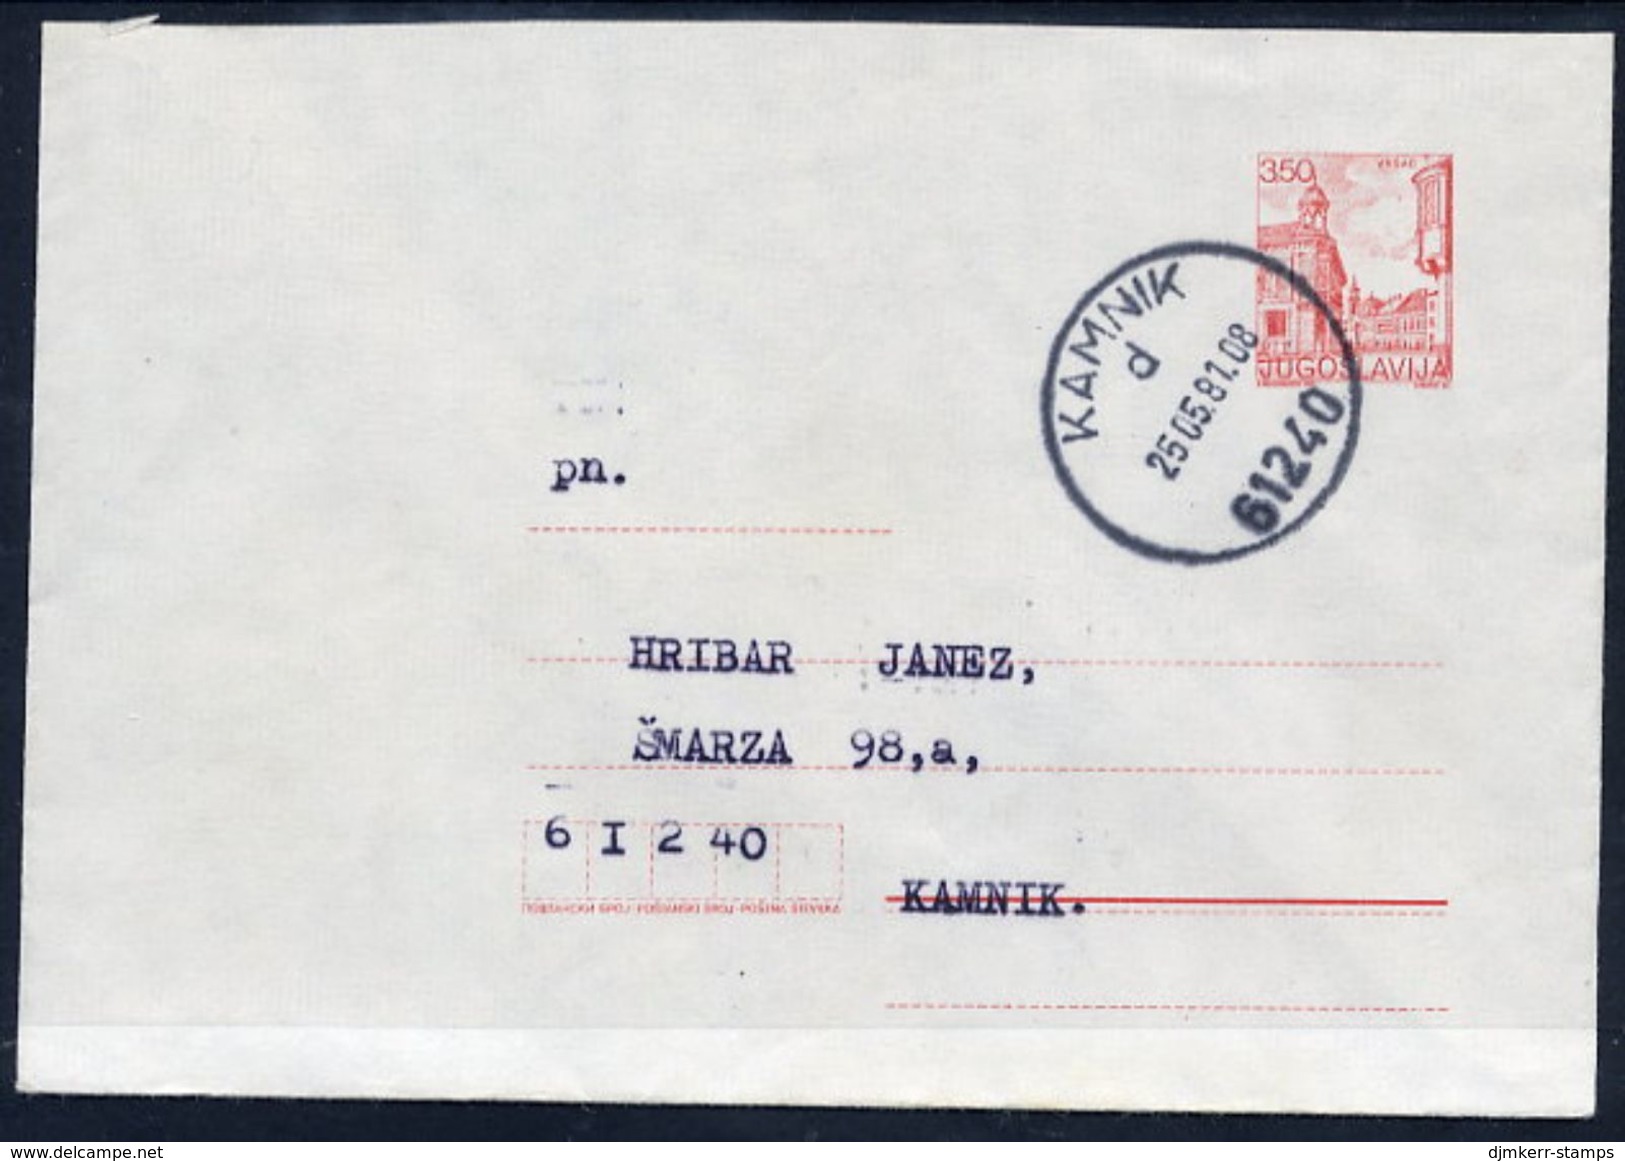 YUGOSLAVIA 1981 Tourism 3.50 D.stationery Envelope Used Without Additional Franking.  Michel U63 - Entiers Postaux